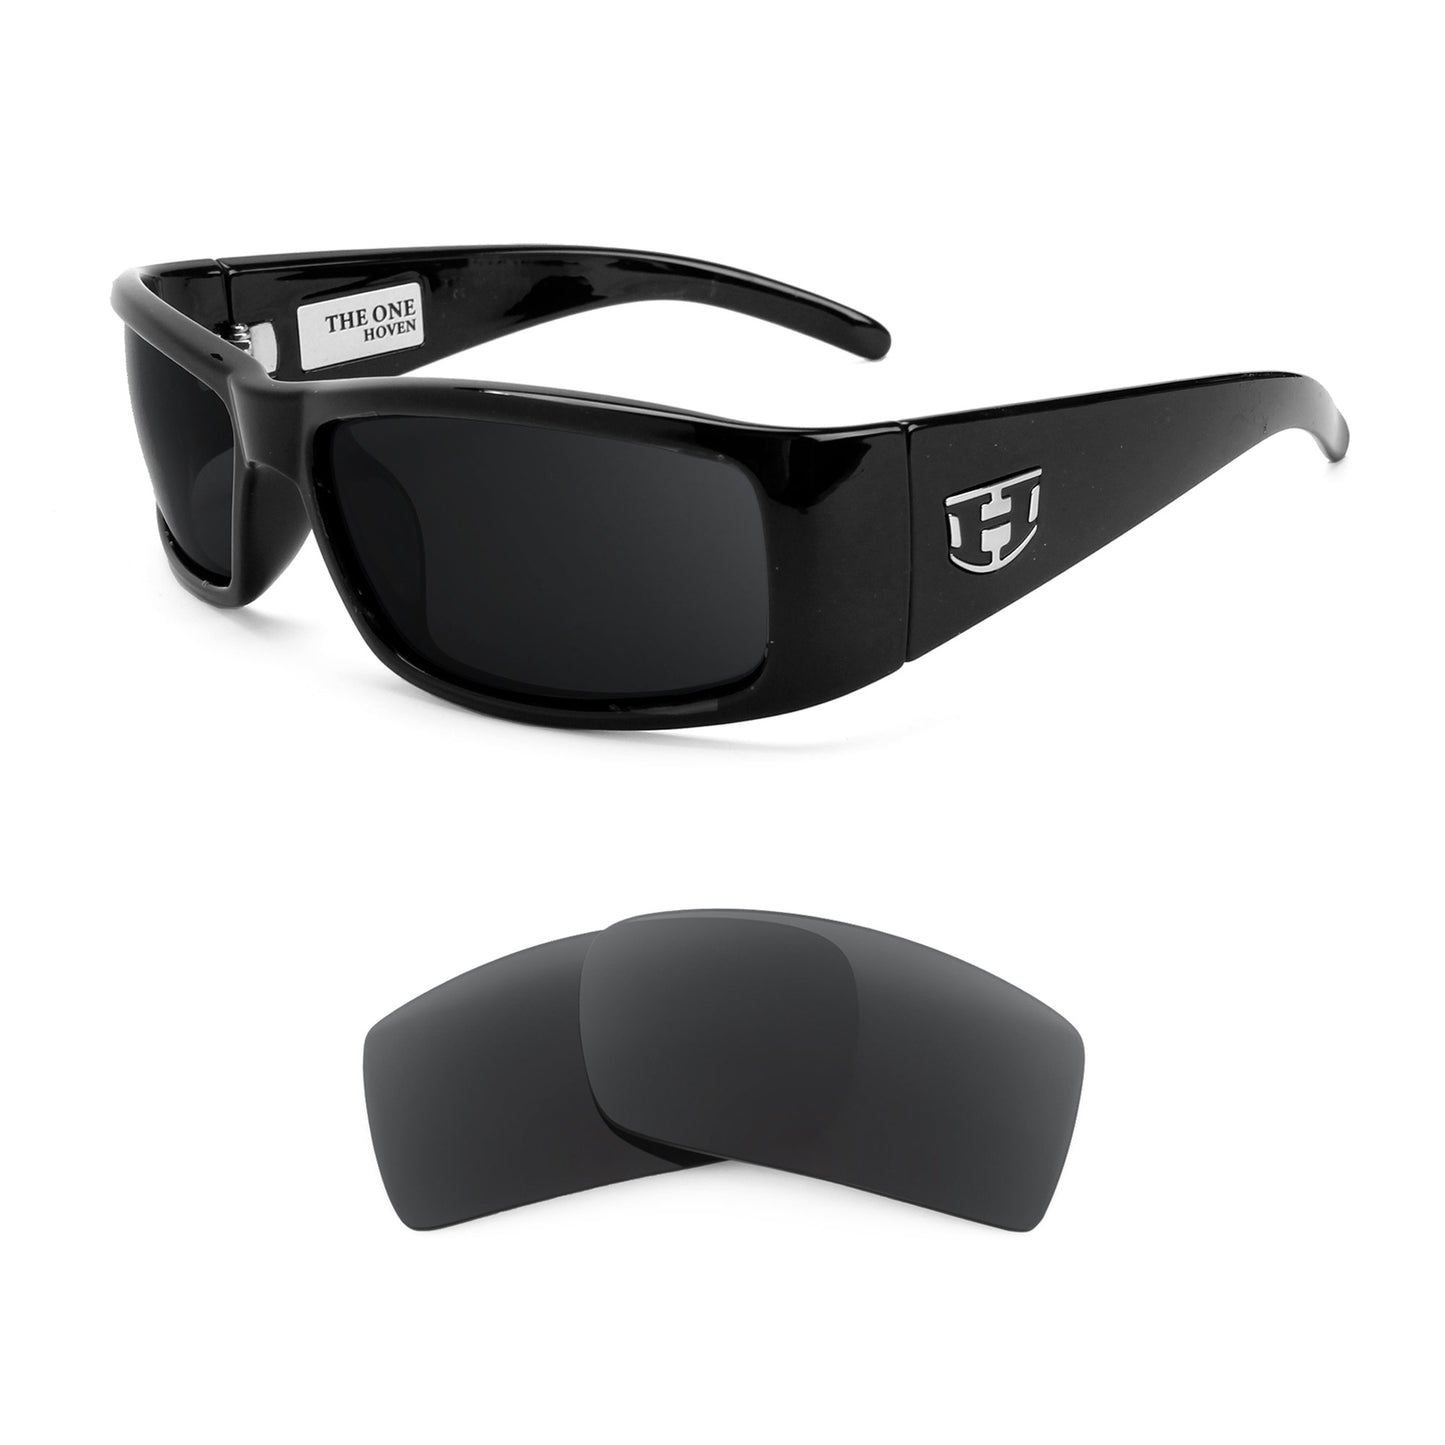 Hoven The One sunglasses with replacement lenses